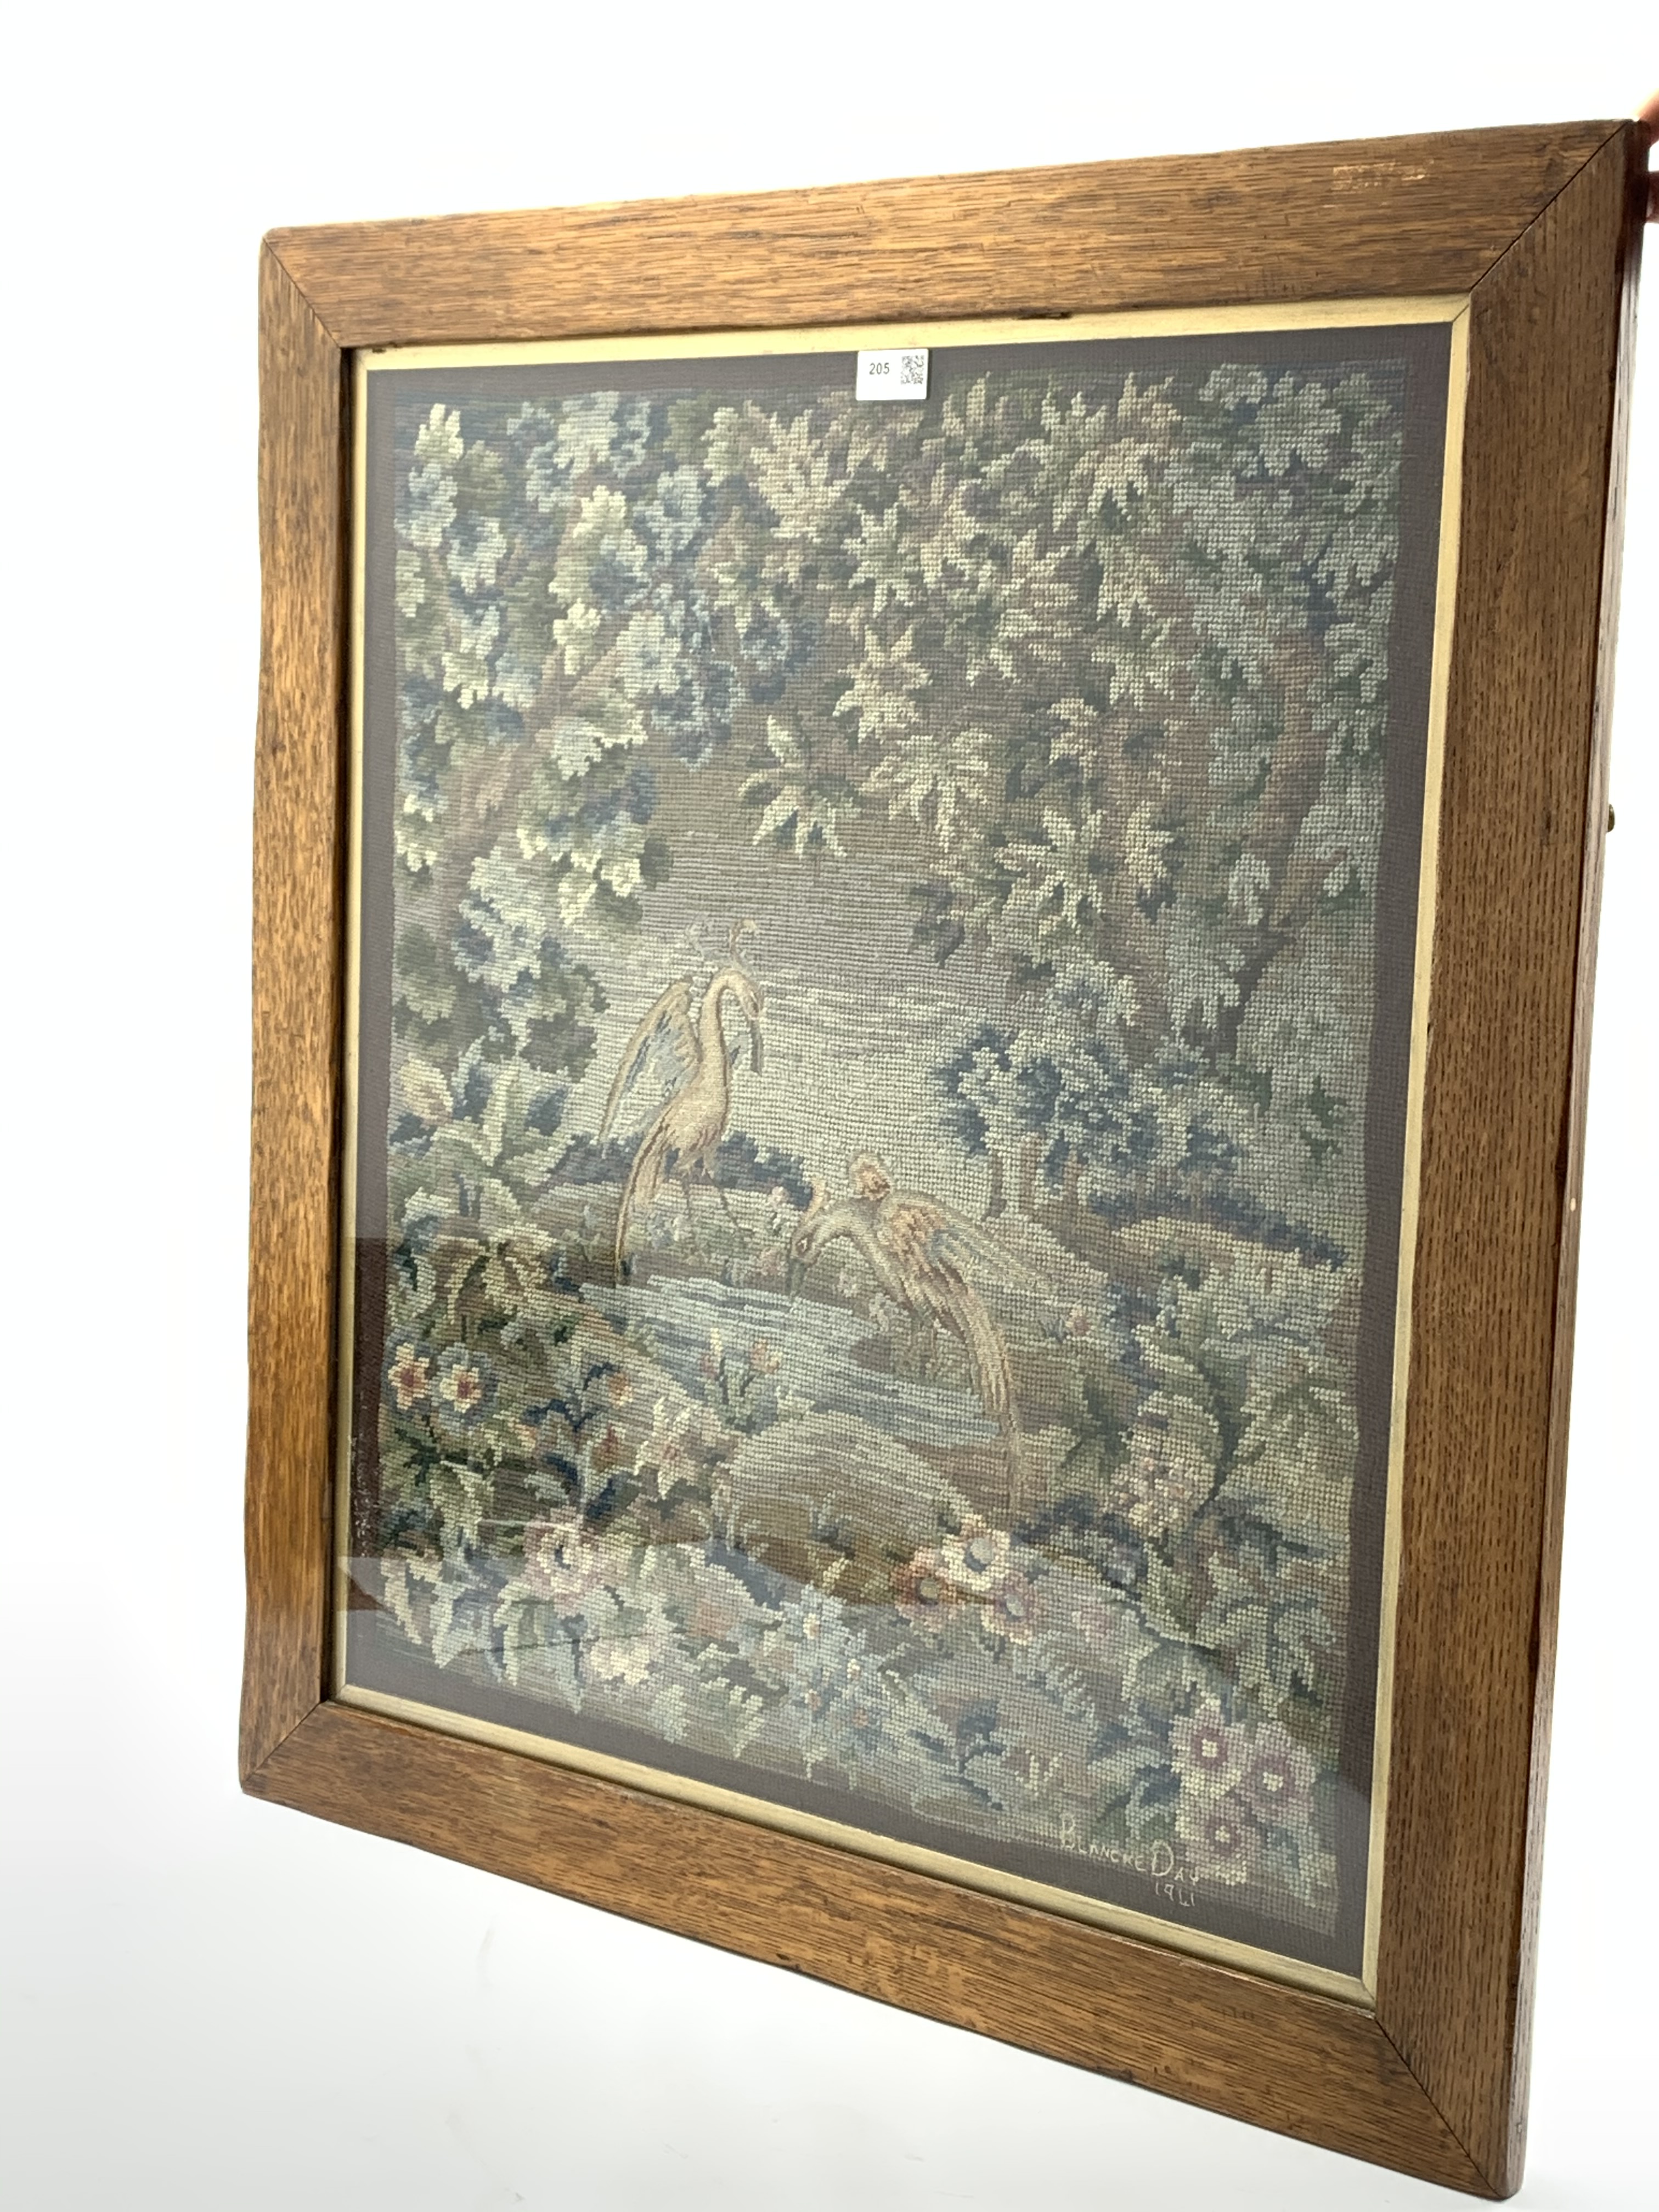 Needle work panel depicting two birds drinking from a pond, by Blanche Day, 70cm x 60cm,